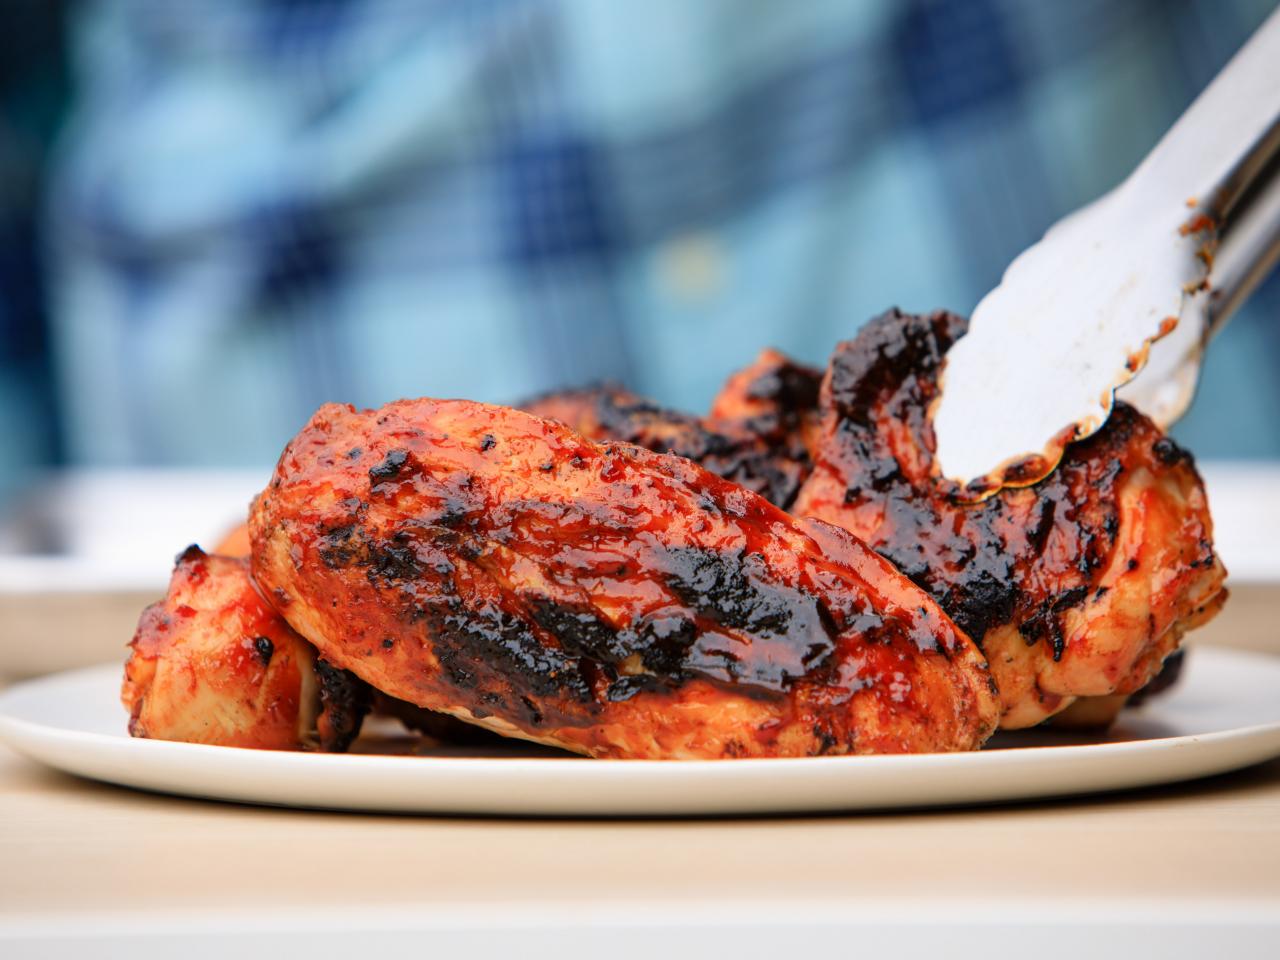 How to Grill Chicken Breast Perfectly Every Time